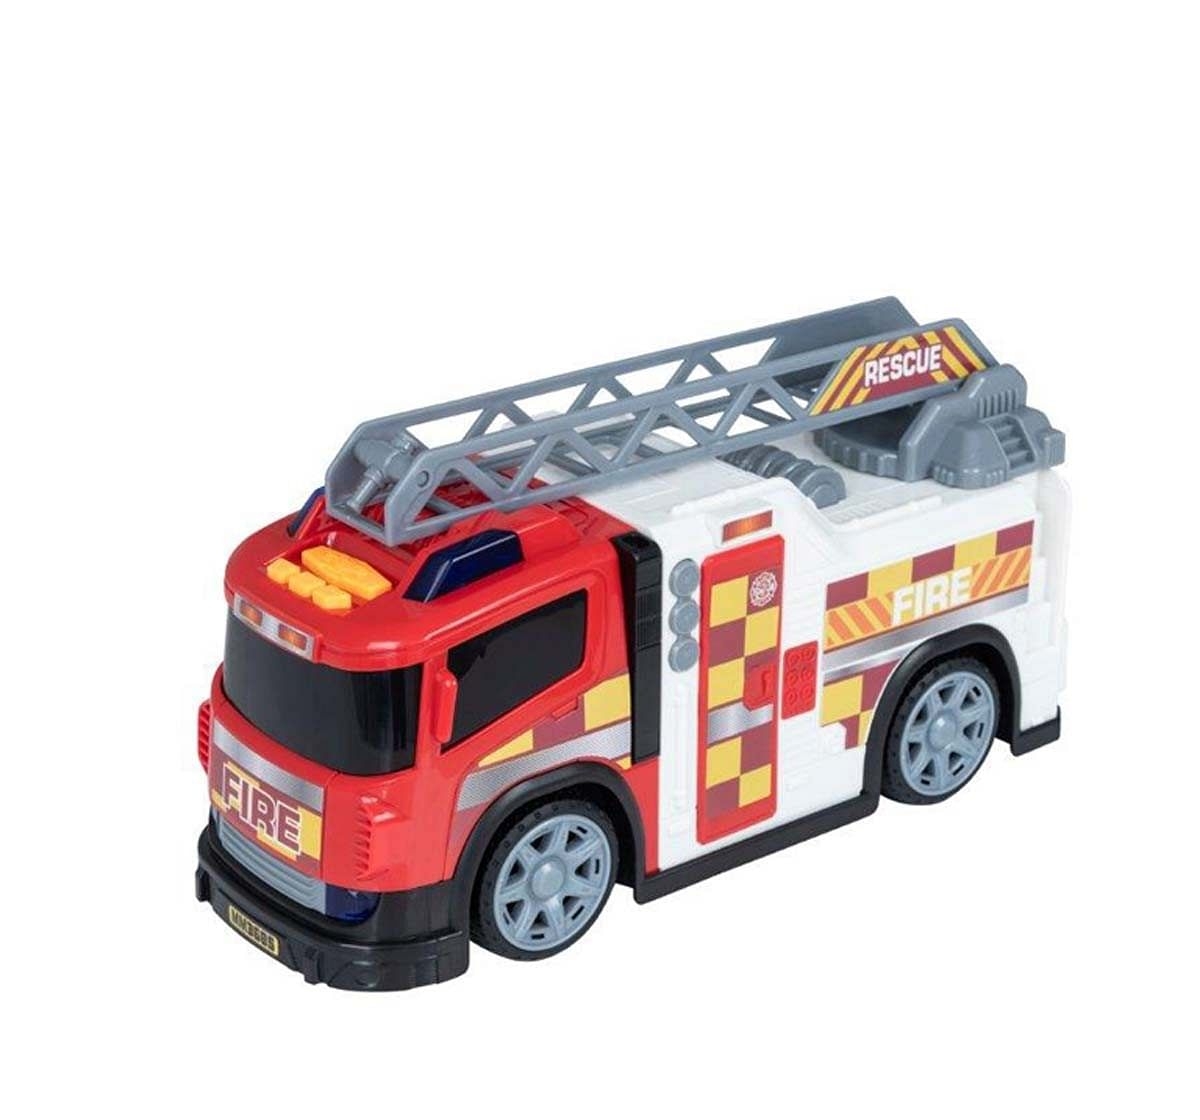 Teamsterz Light And Sound Mighty Moverz Fire Engine Vehicles for Kids Age 3Y+